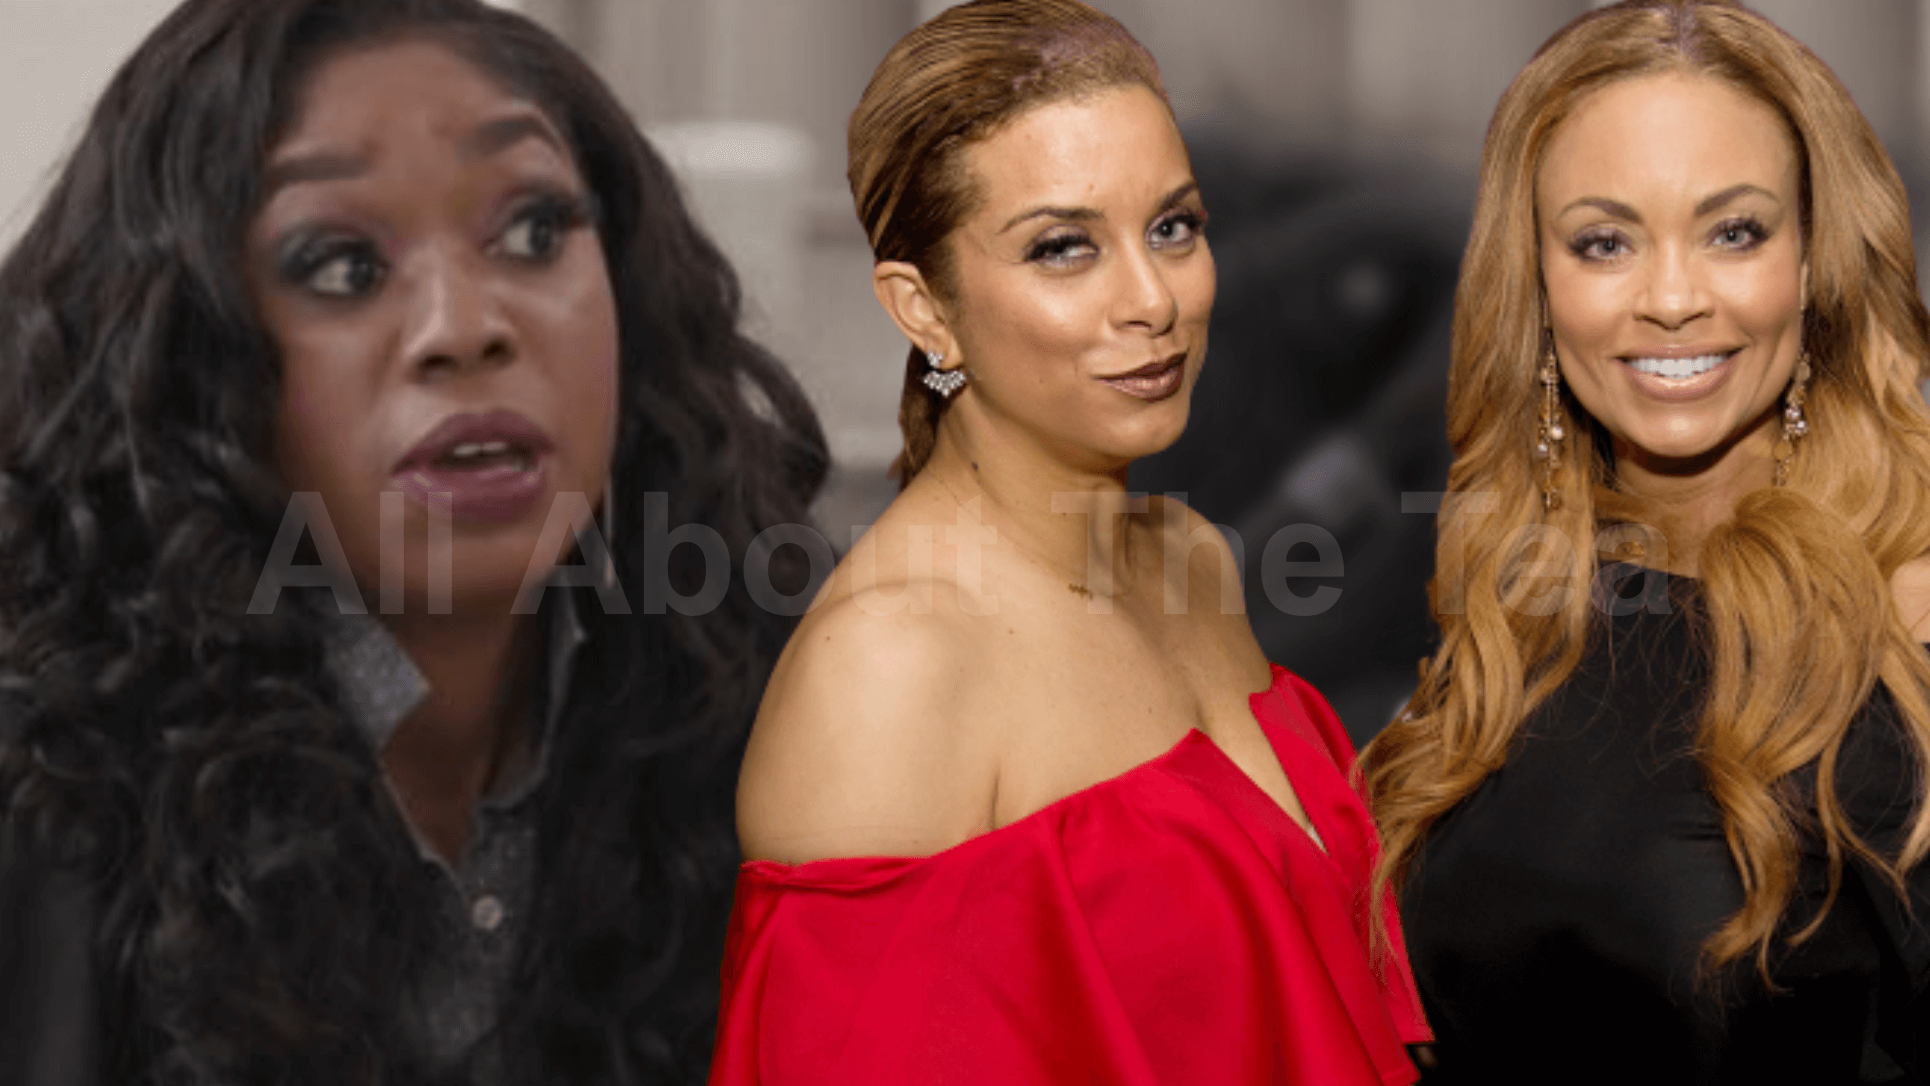 Gizelle Bryant & Robyn Dixon Betray Wendy Osefo, Gossip Behind Her Back and Laugh At Her “Doctor” Title!